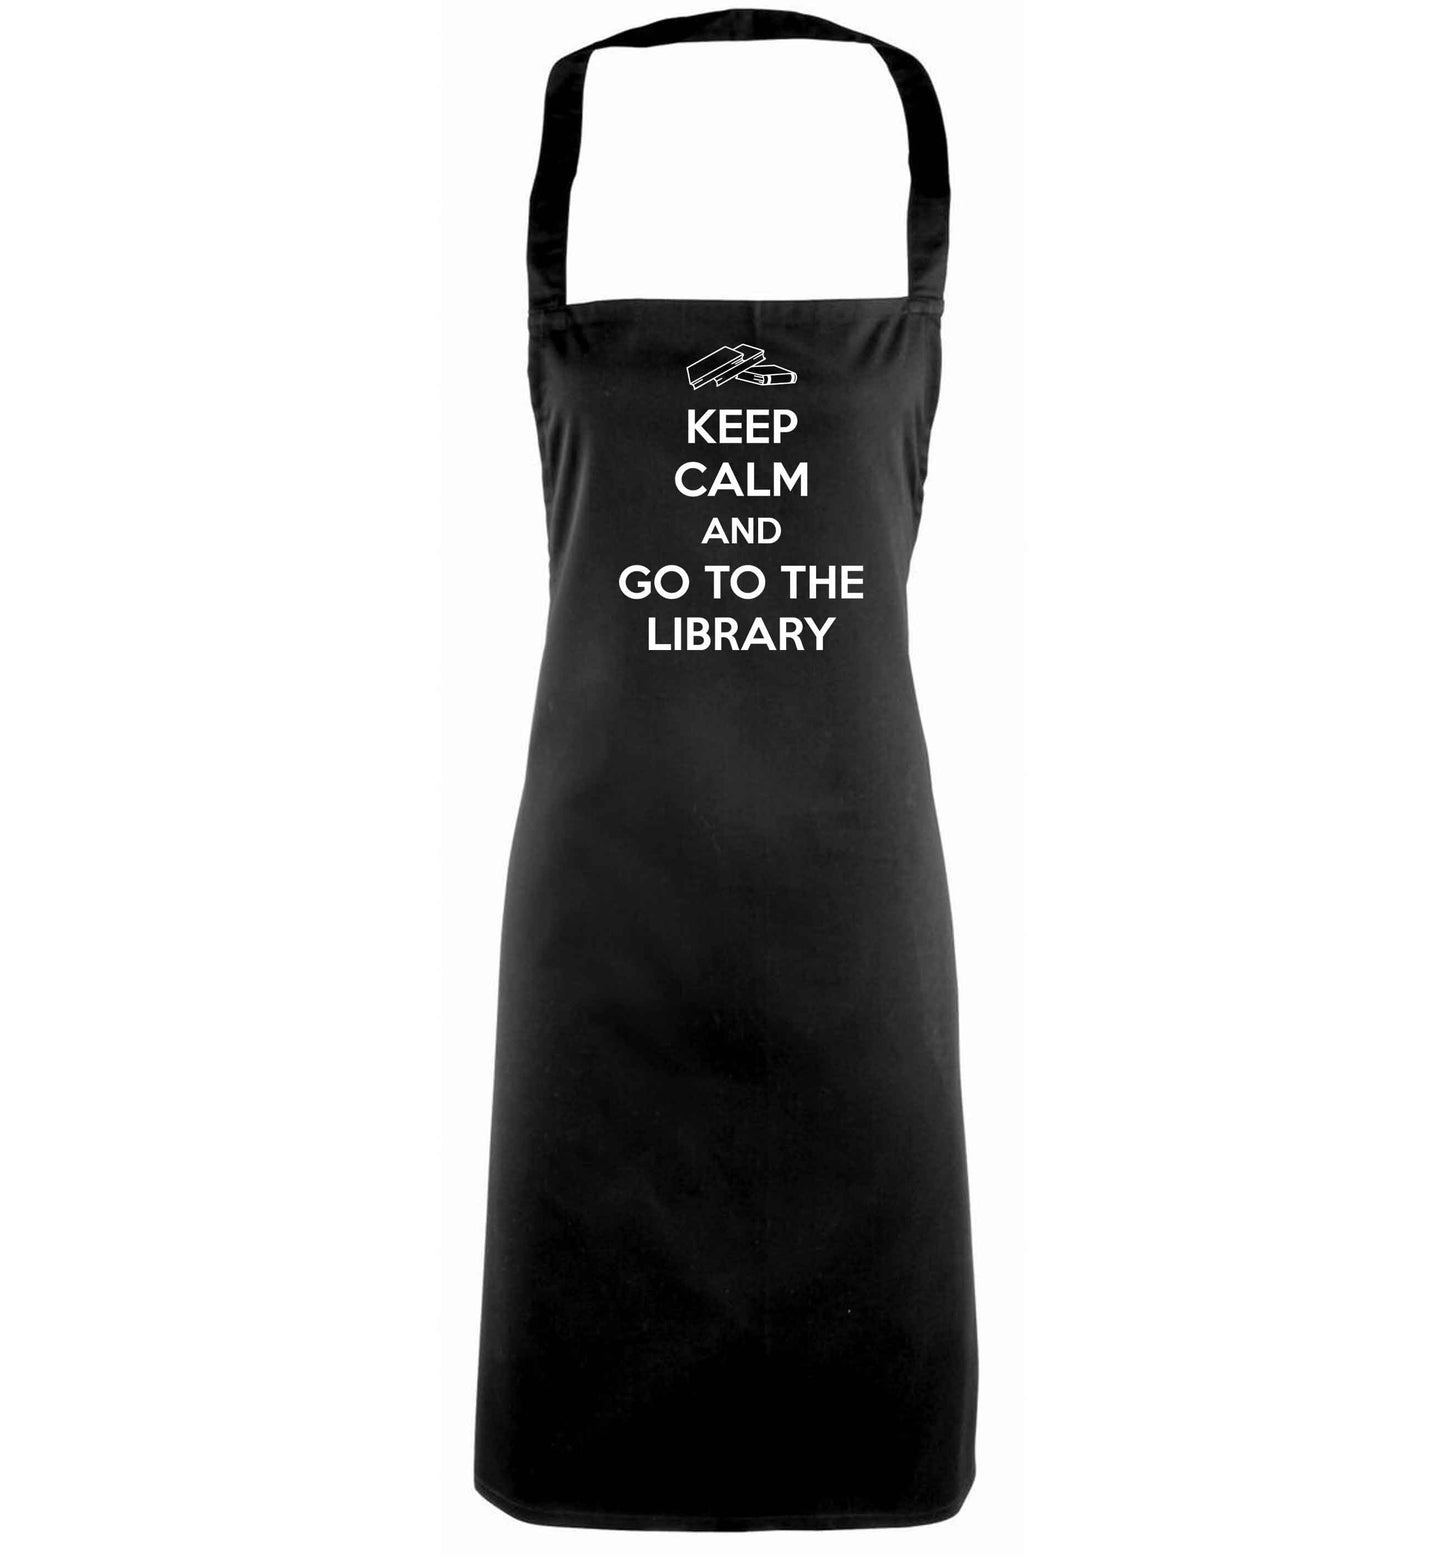 Keep calm and go to the library black apron